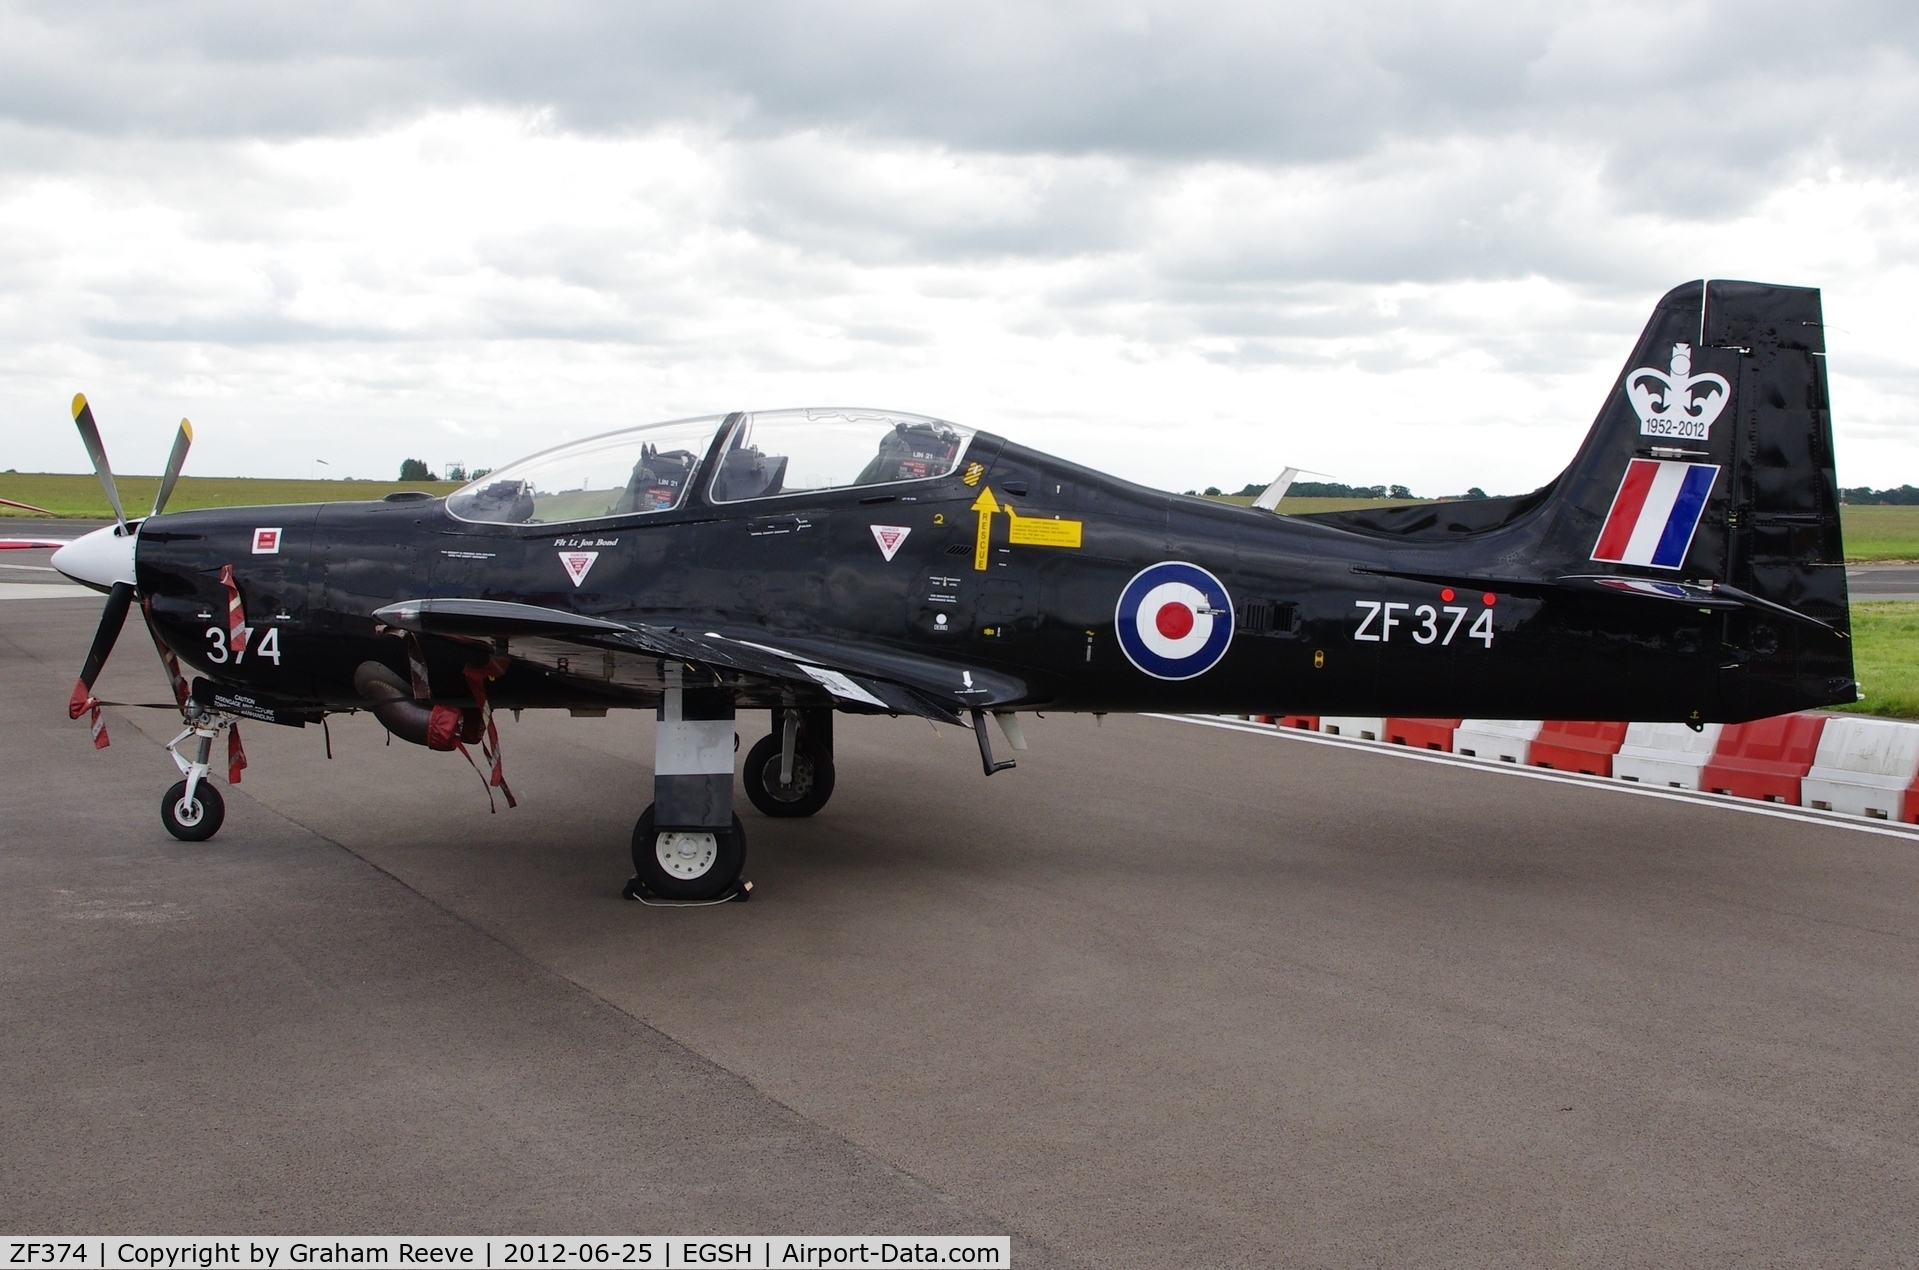 ZF374, 1992 Short S-312 Tucano T1 C/N S117/T88, Parked at Norwich.